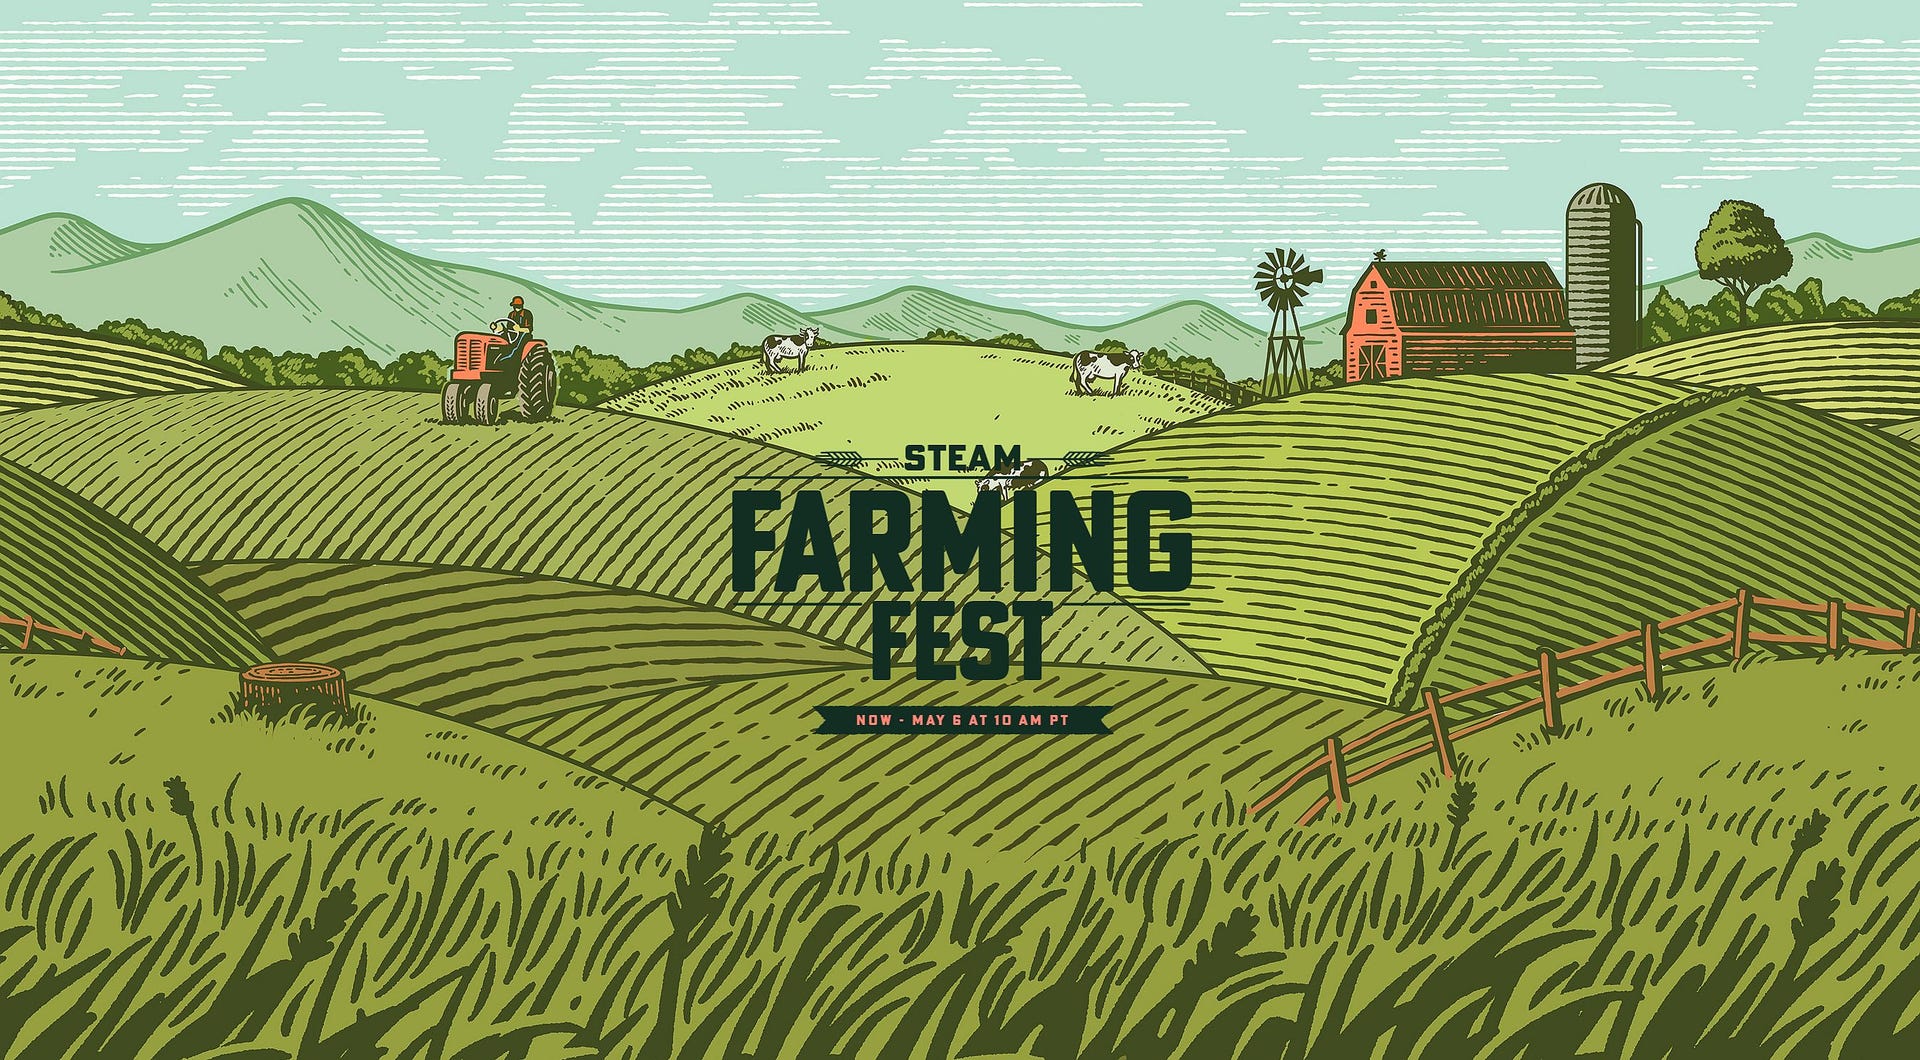 Sow the seeds of fun with Steam’s Farming Fest – we’ve picked the perfect games for every kind of virtual farmer